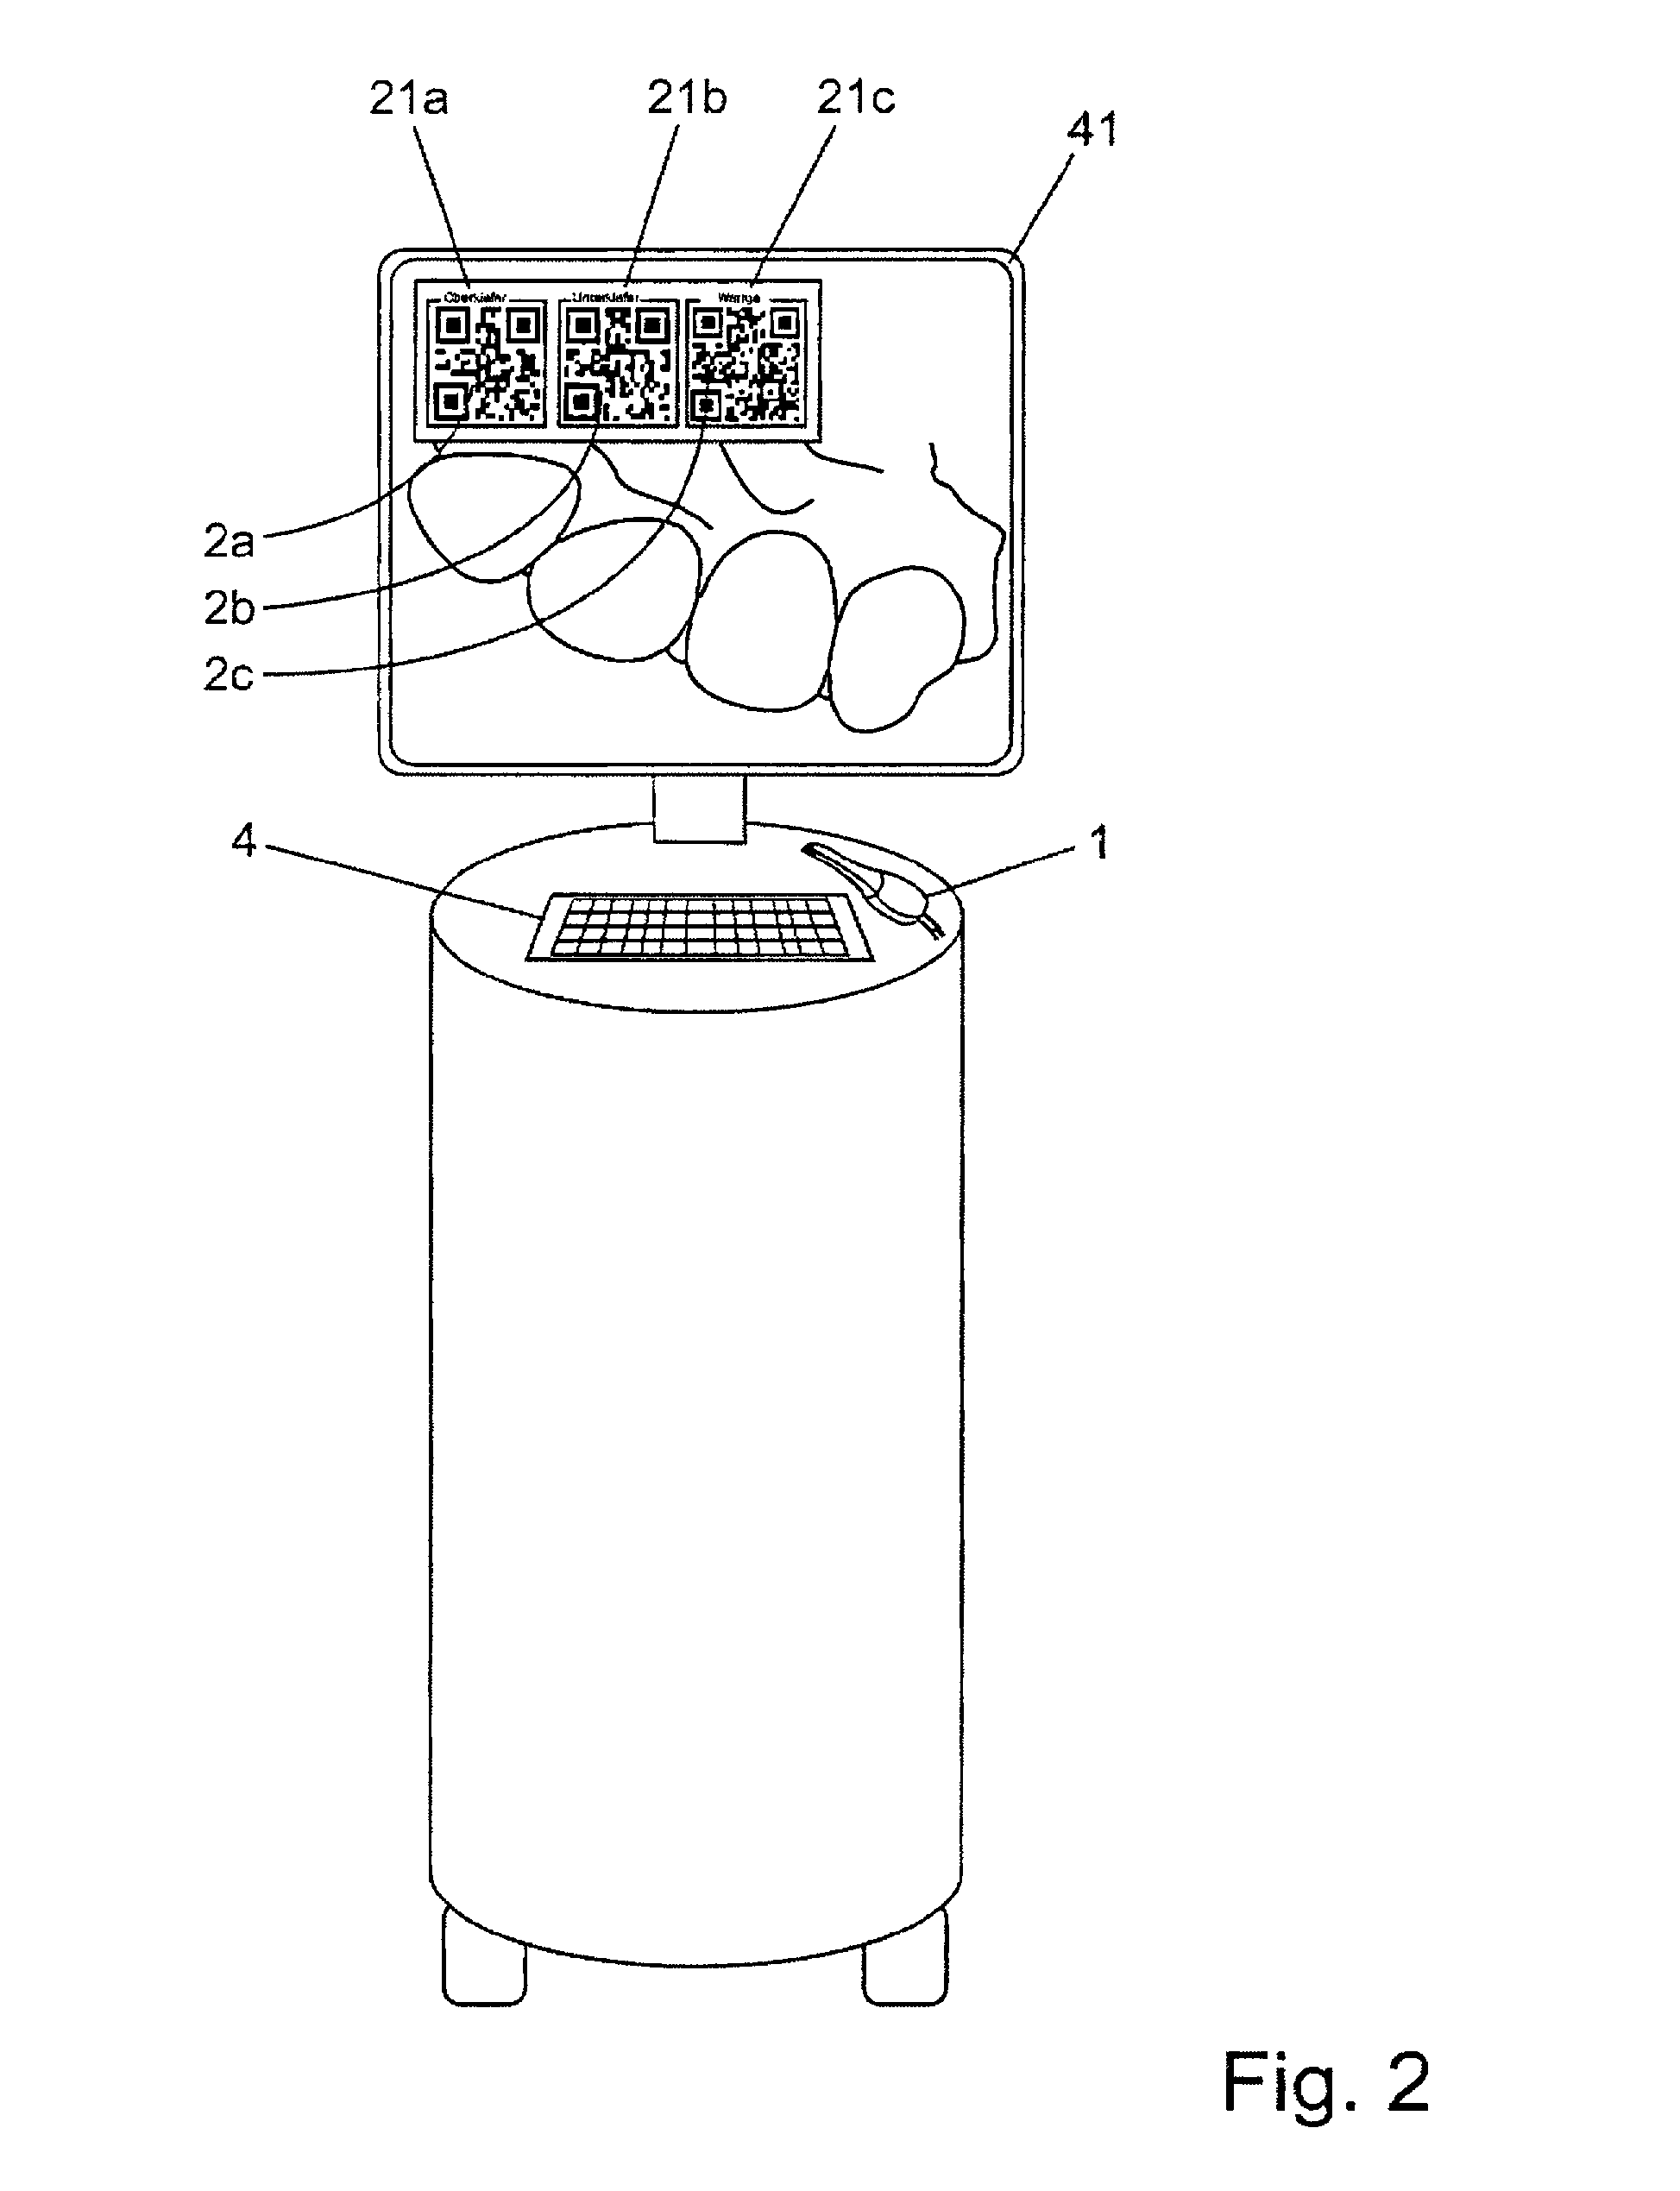 Method and device for controlling a computer program by means of an intraoral scanner